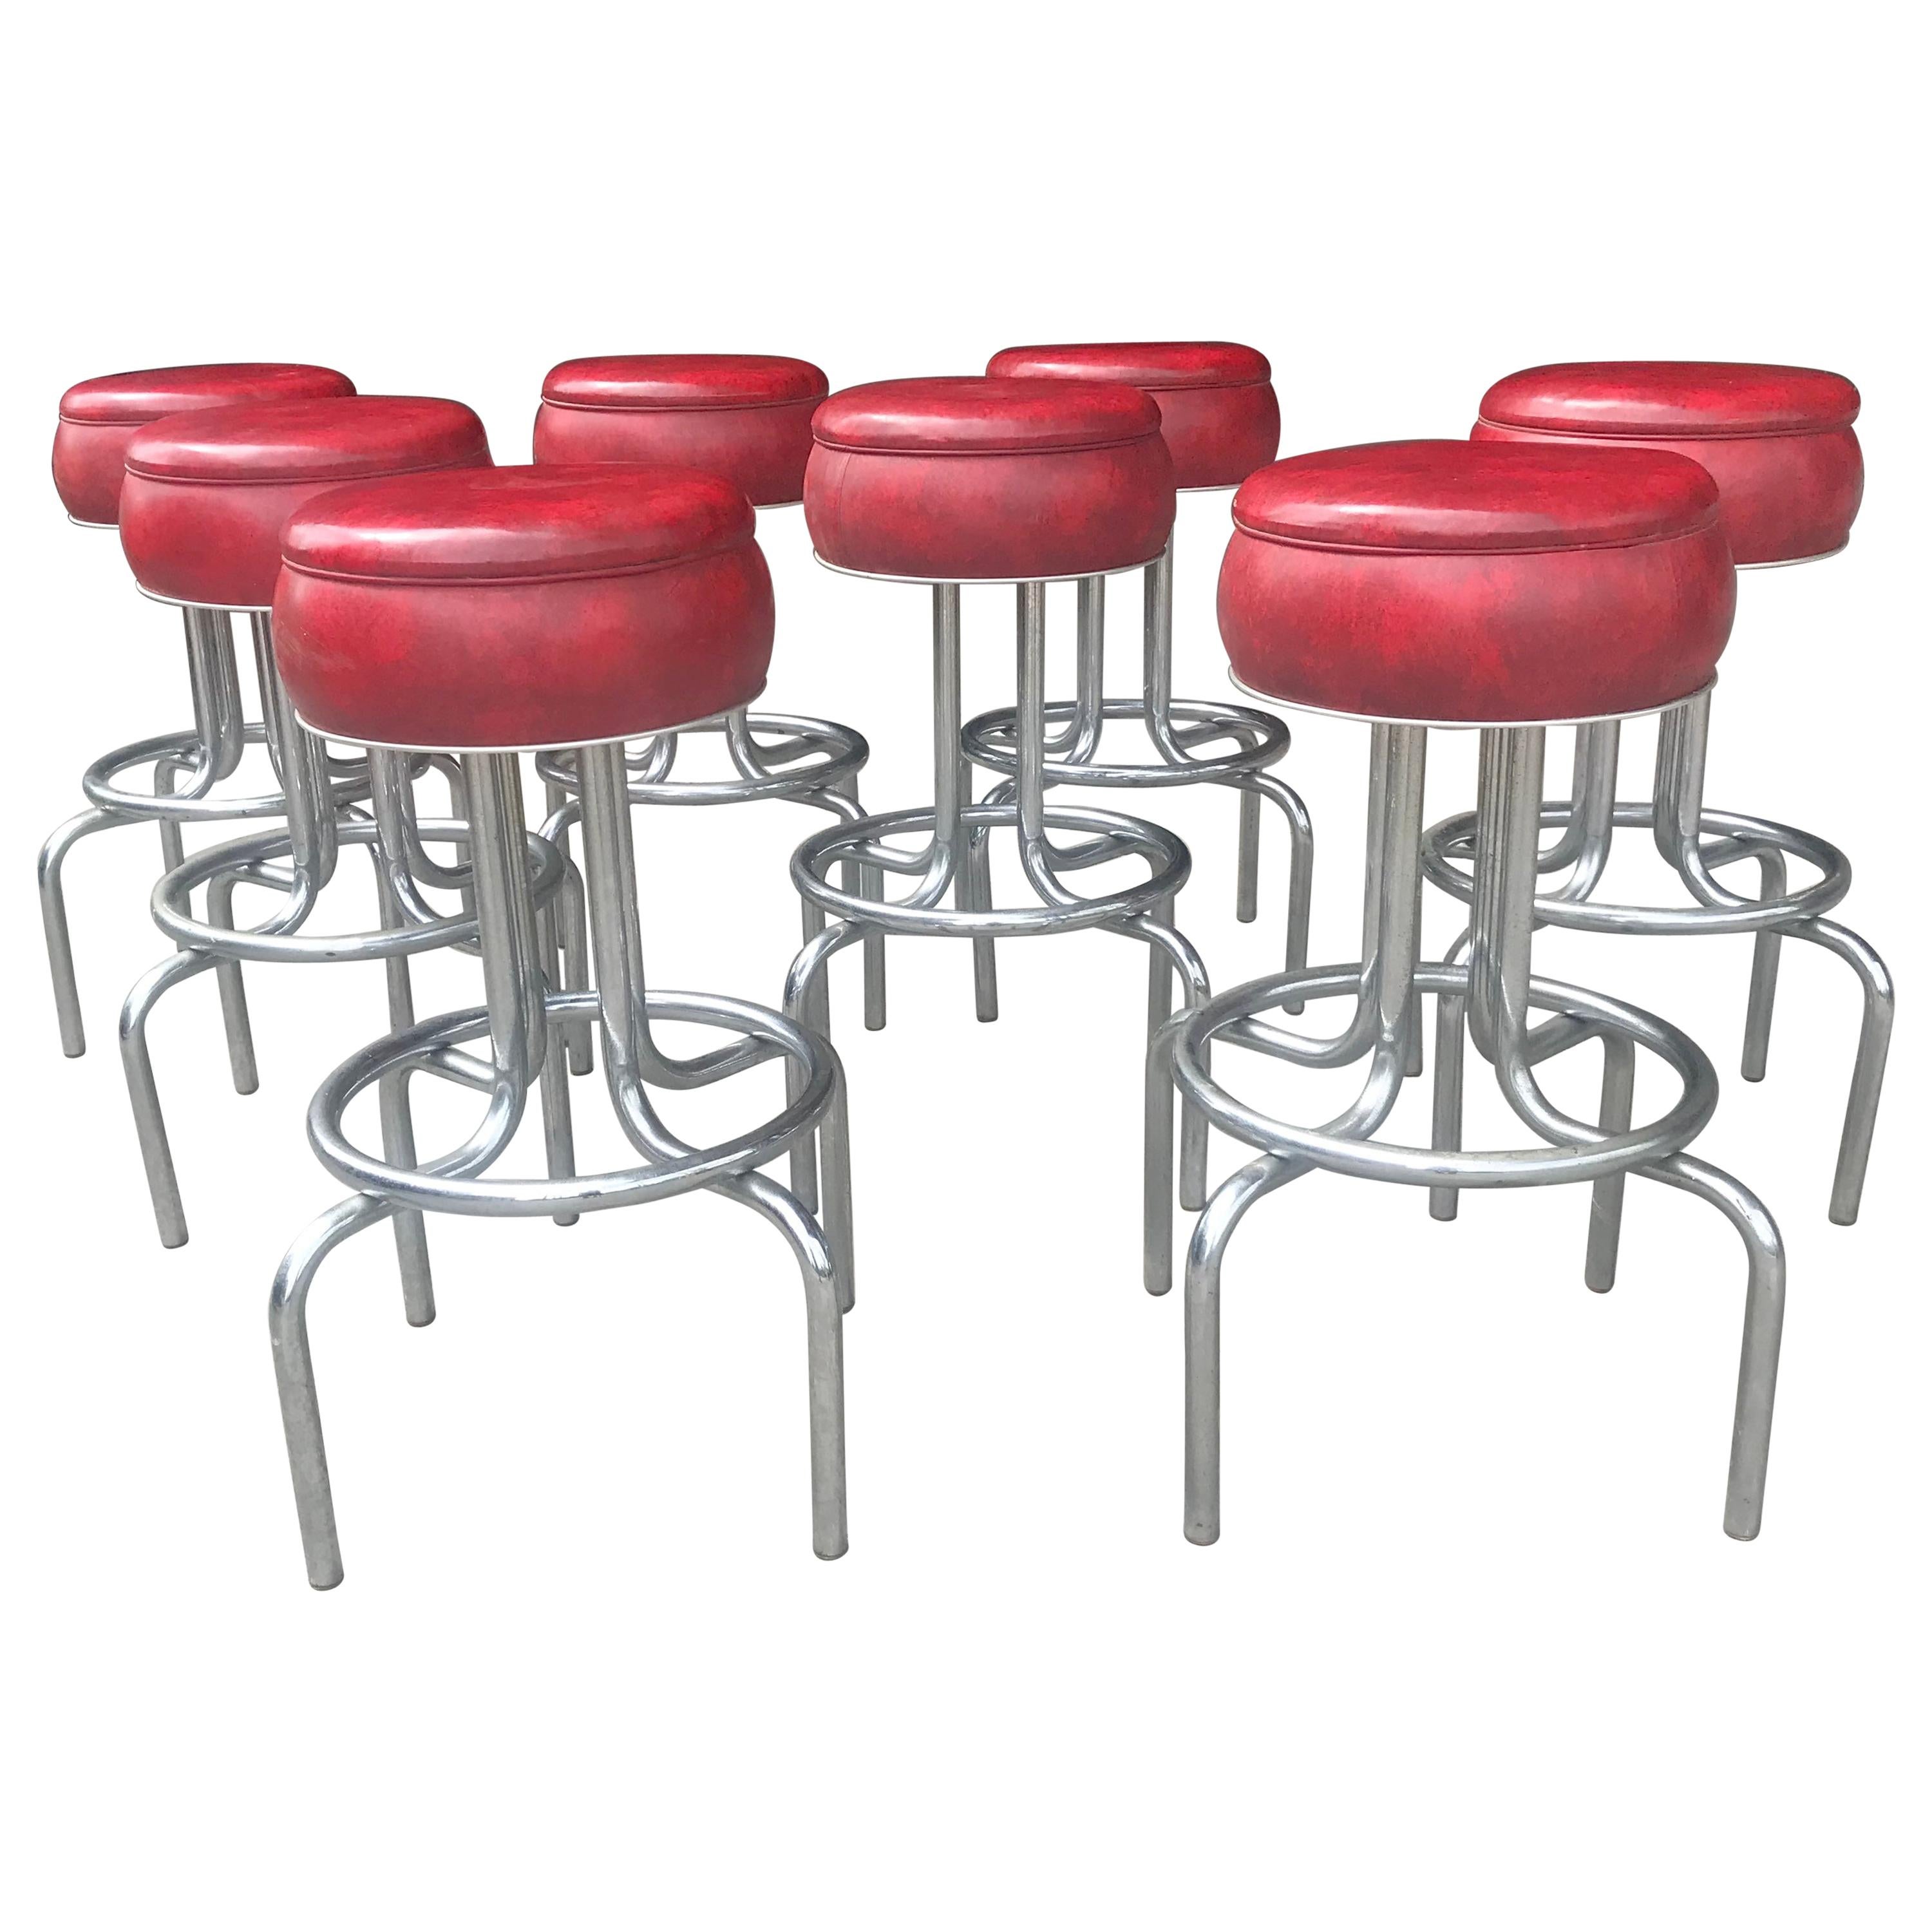 Set 8 Art Deco Stylized Red and Chrome Bar / Counter Stools, Wolfgang Hoffmann